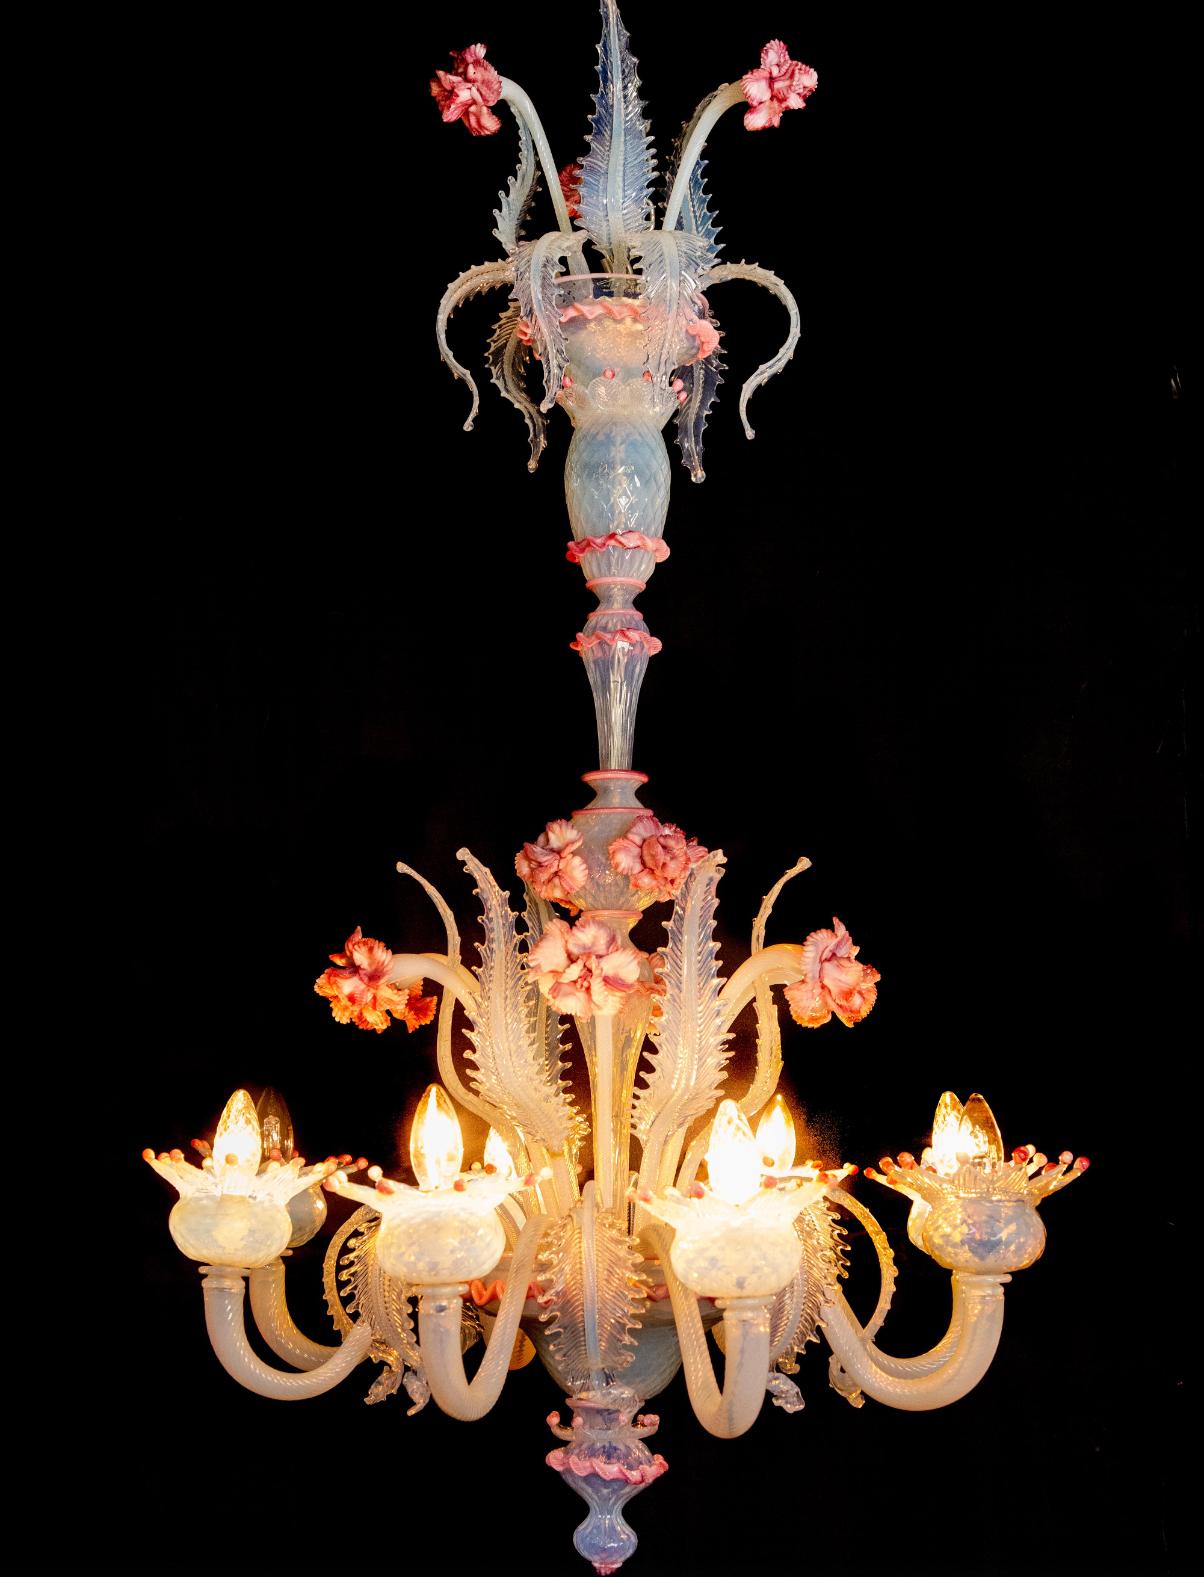 Italian Stunning Trio Light Blue and Pink Venetian Chandeliers, Murano, 1950s For Sale